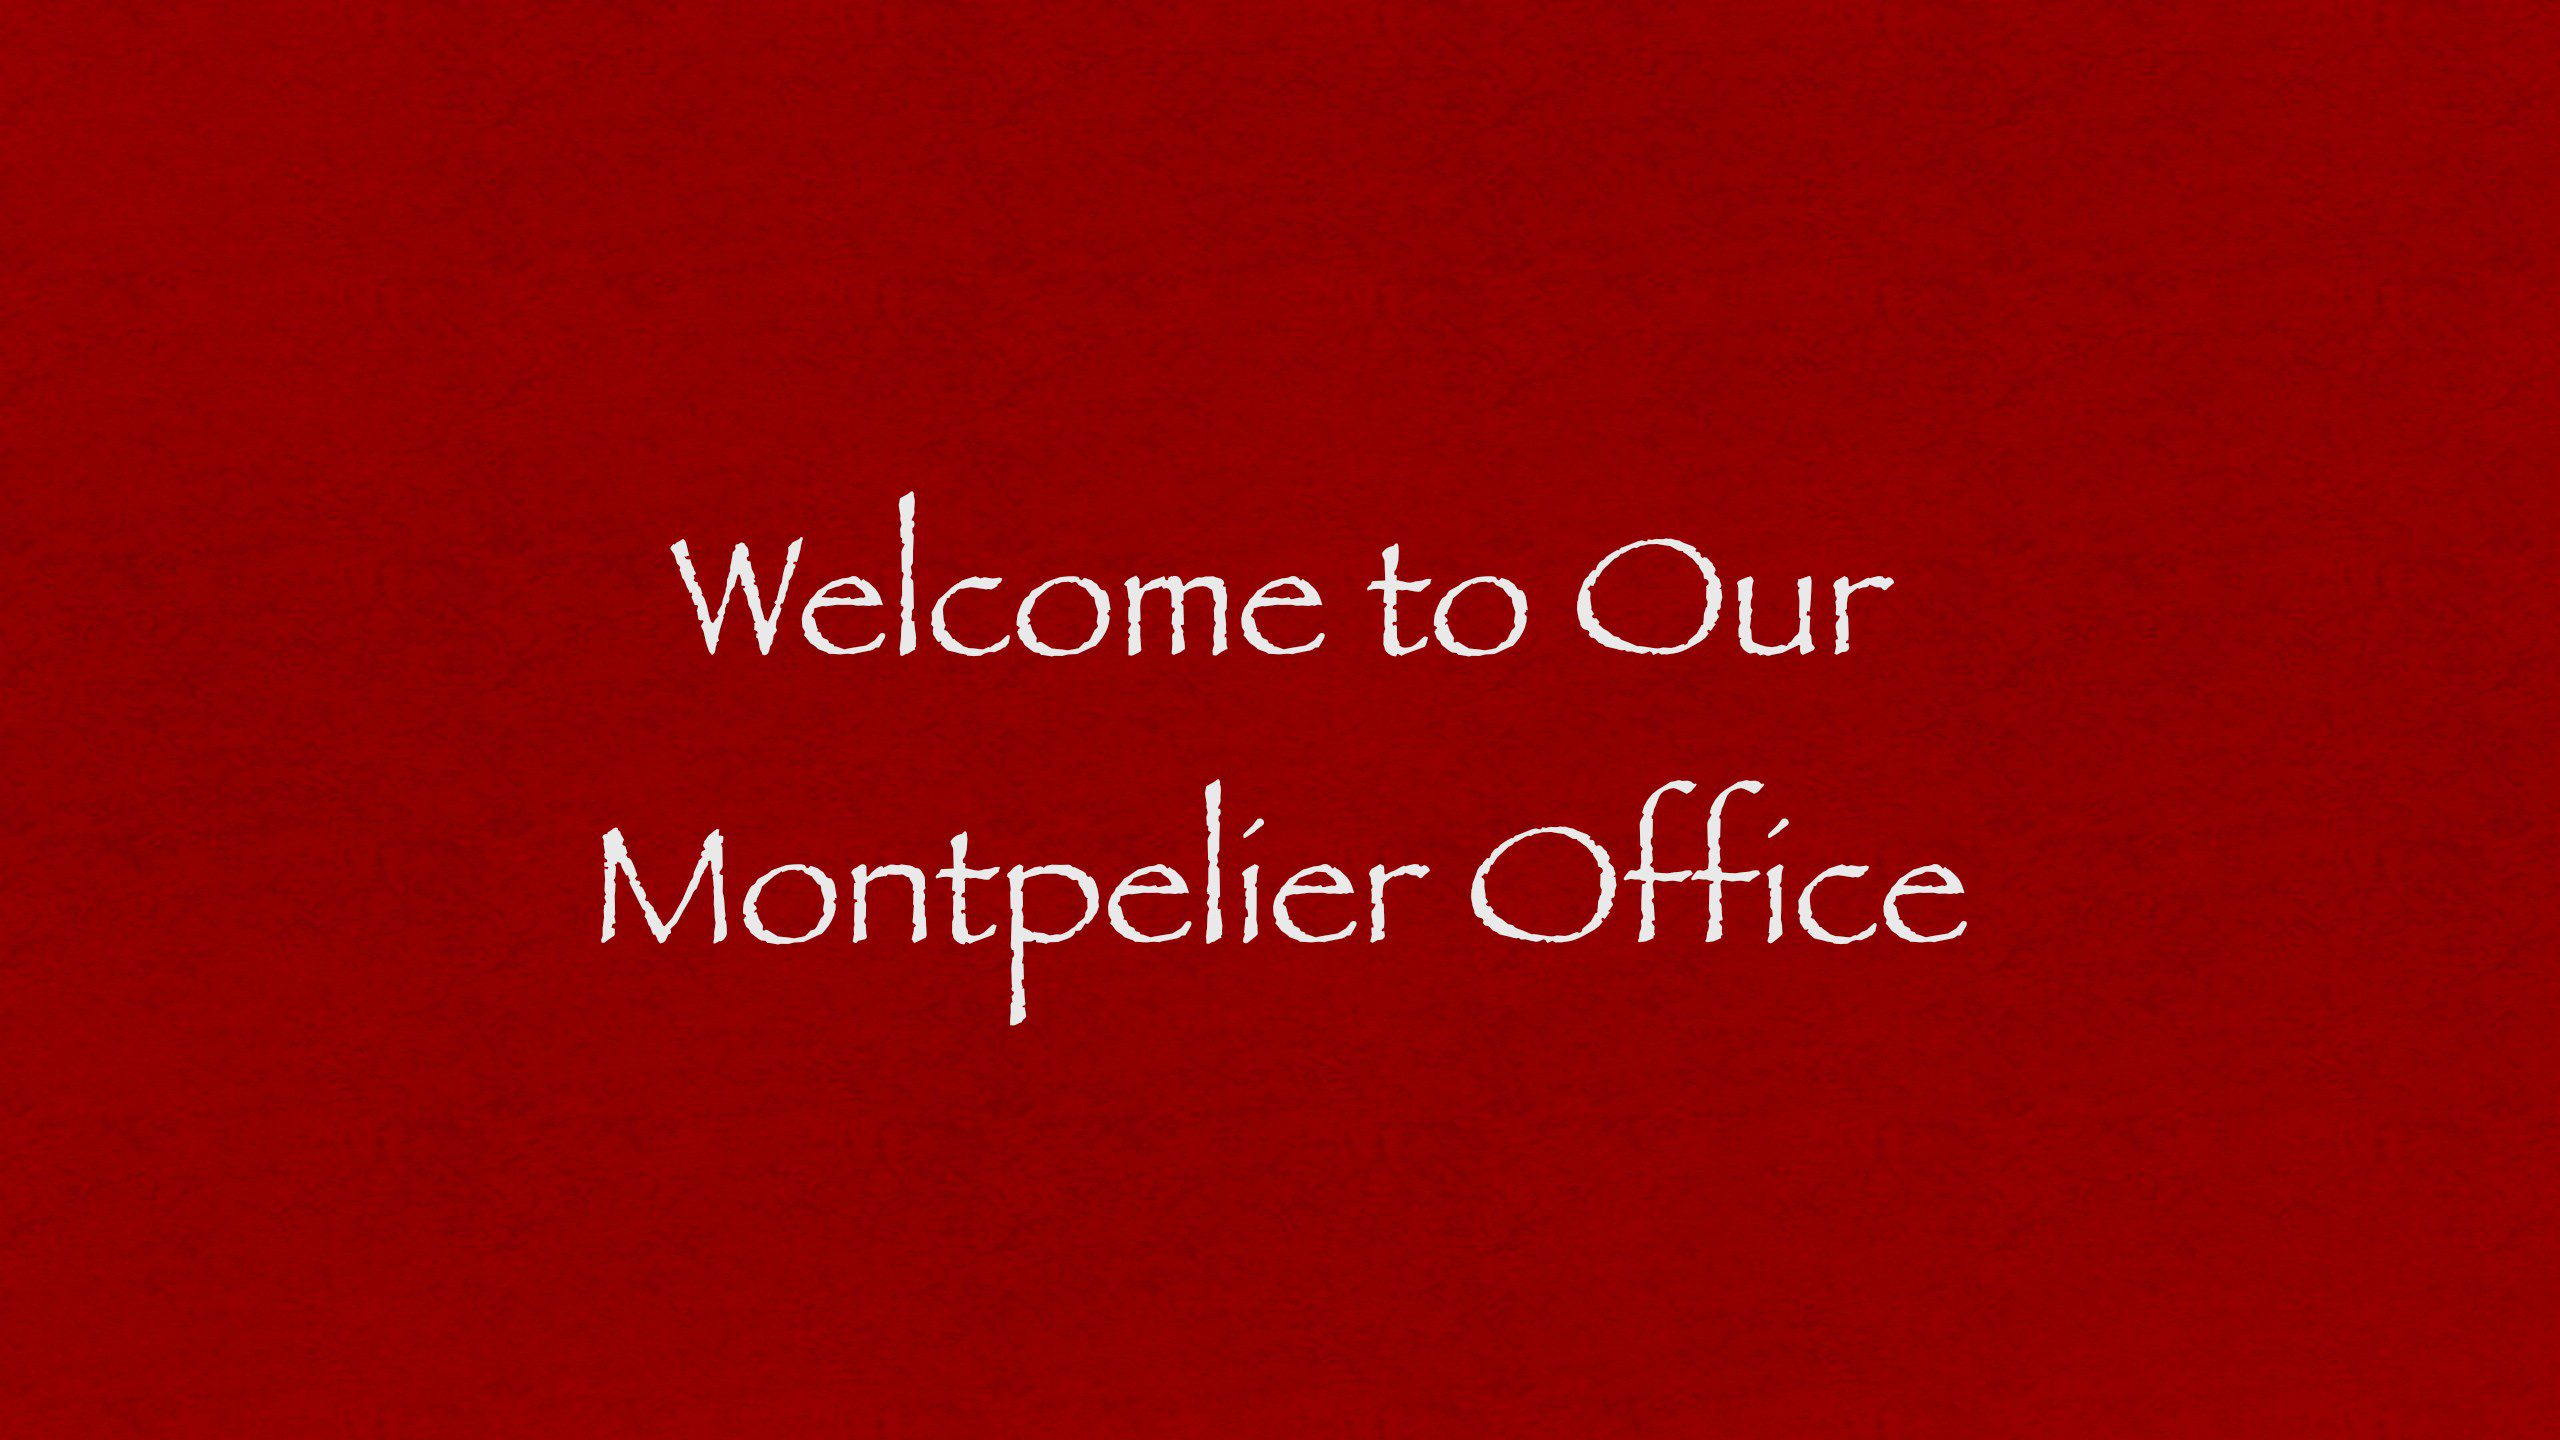 Welcome To Our Montpelier Office